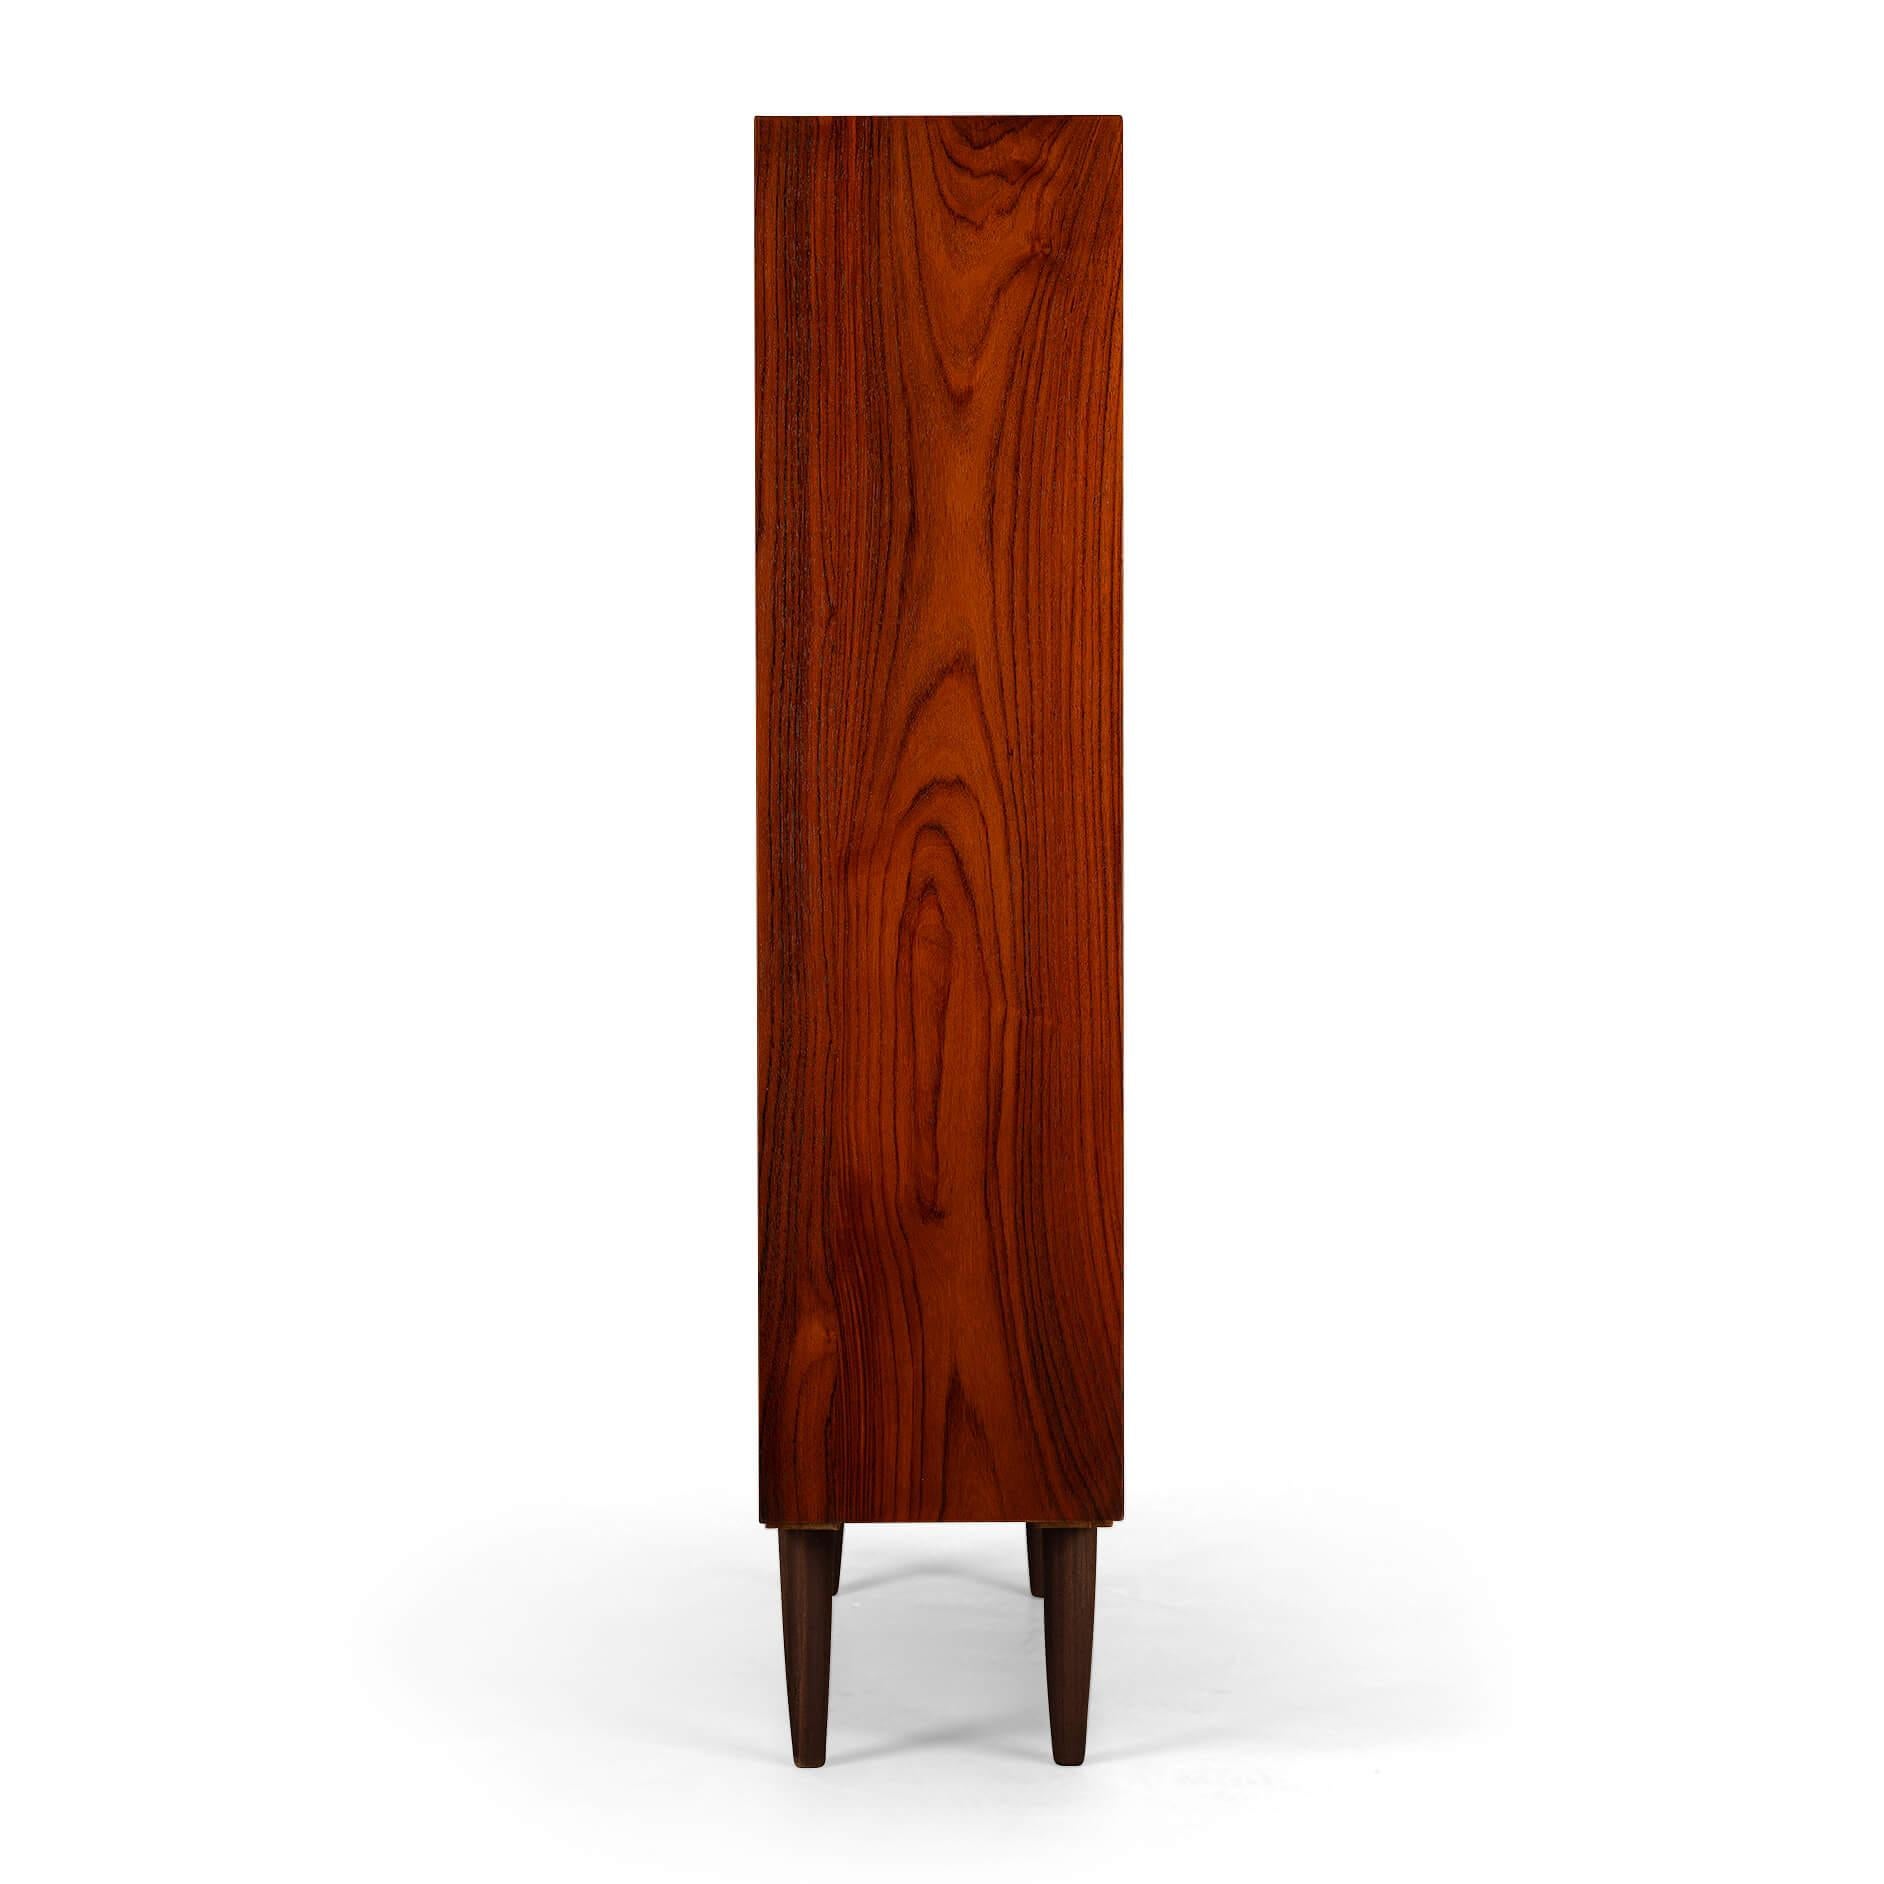 Danish Design
Danish bookcase in beautiful rosewood veneer. Design by IB Kofod Larsen and made by Faarup Mobelfabrik. This bookcase has a total of 8 height-adjustable horizontal shelves. We have two more shelves that are not in this picture. In